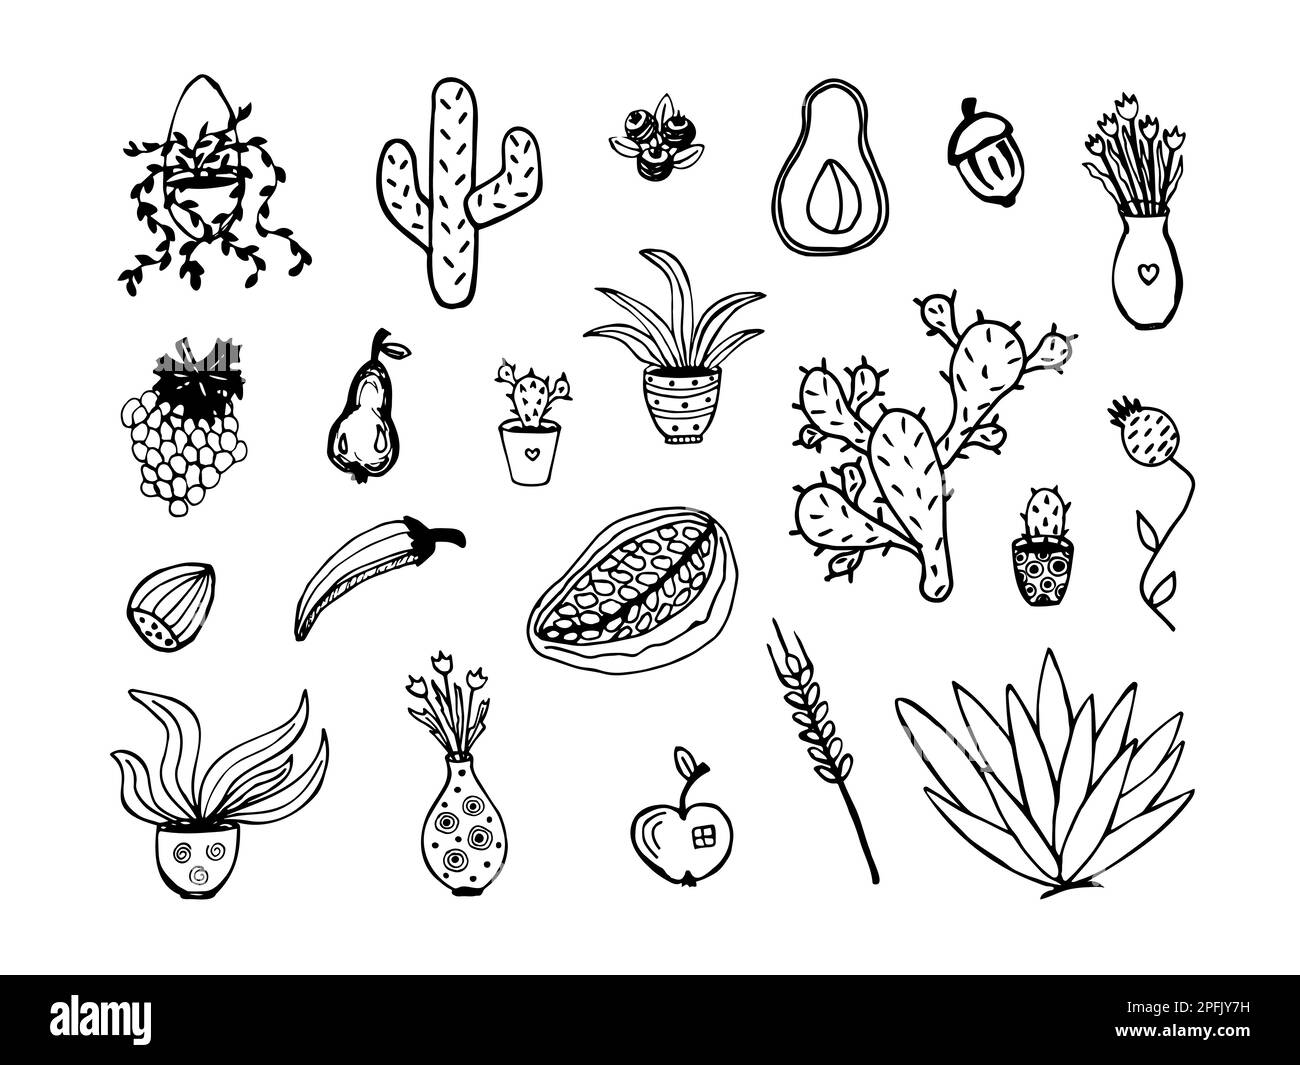 Types of tulips Stock Vector Images - Alamy